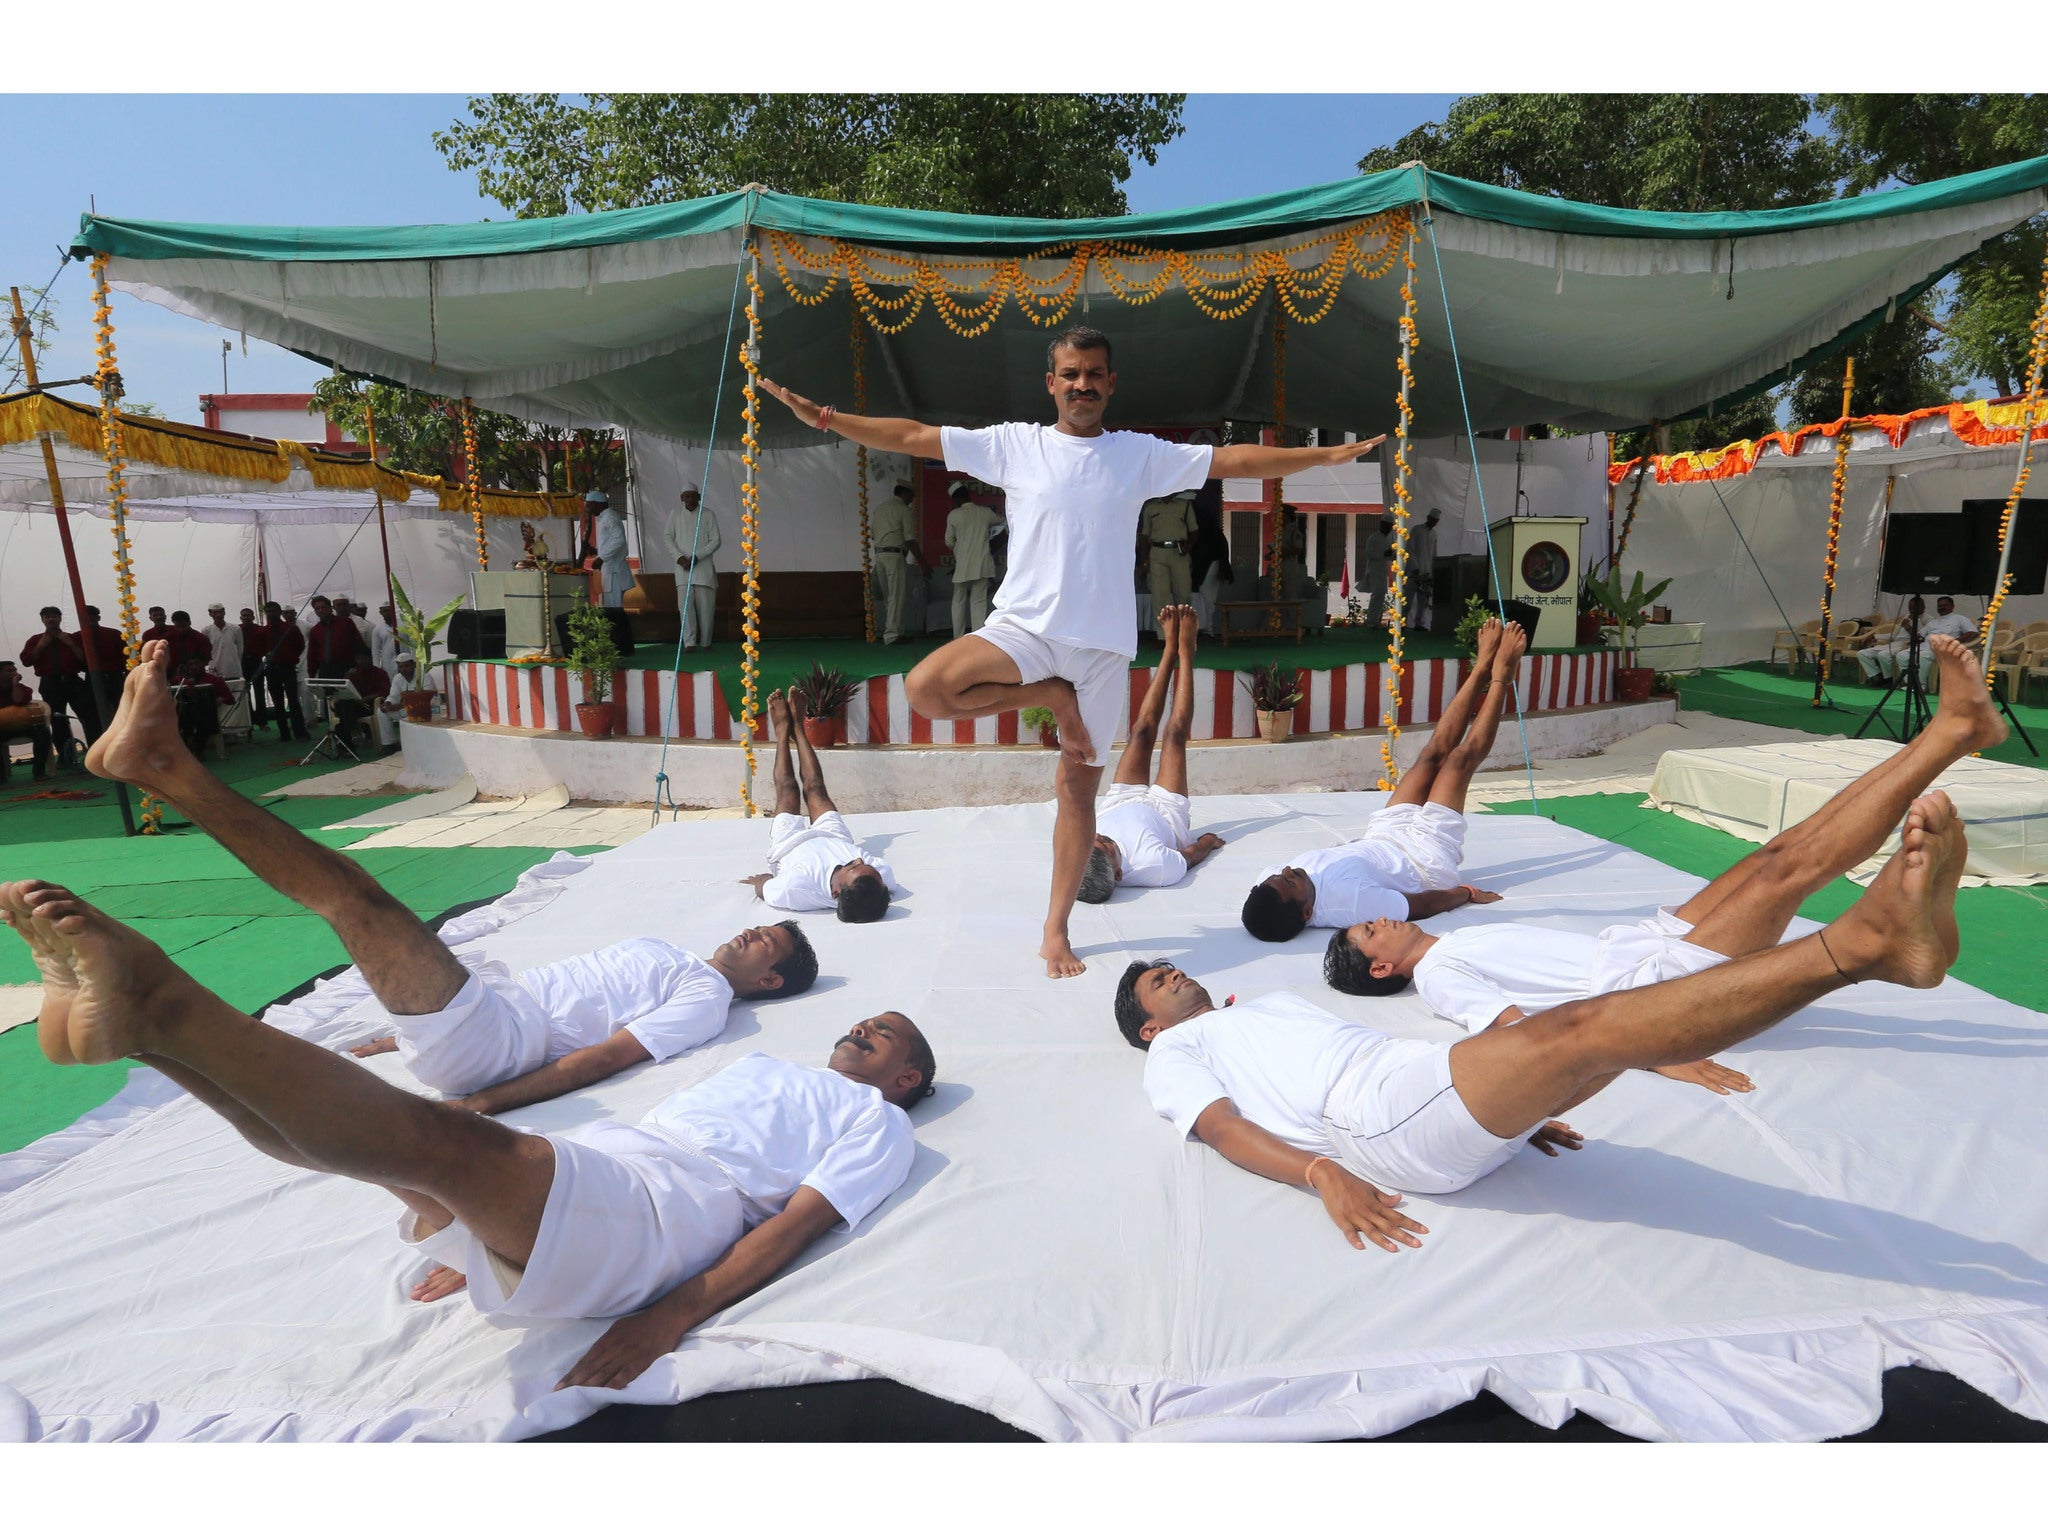 Inmates of Central Jail in Bhopal, India take part in a mass Yoga session today